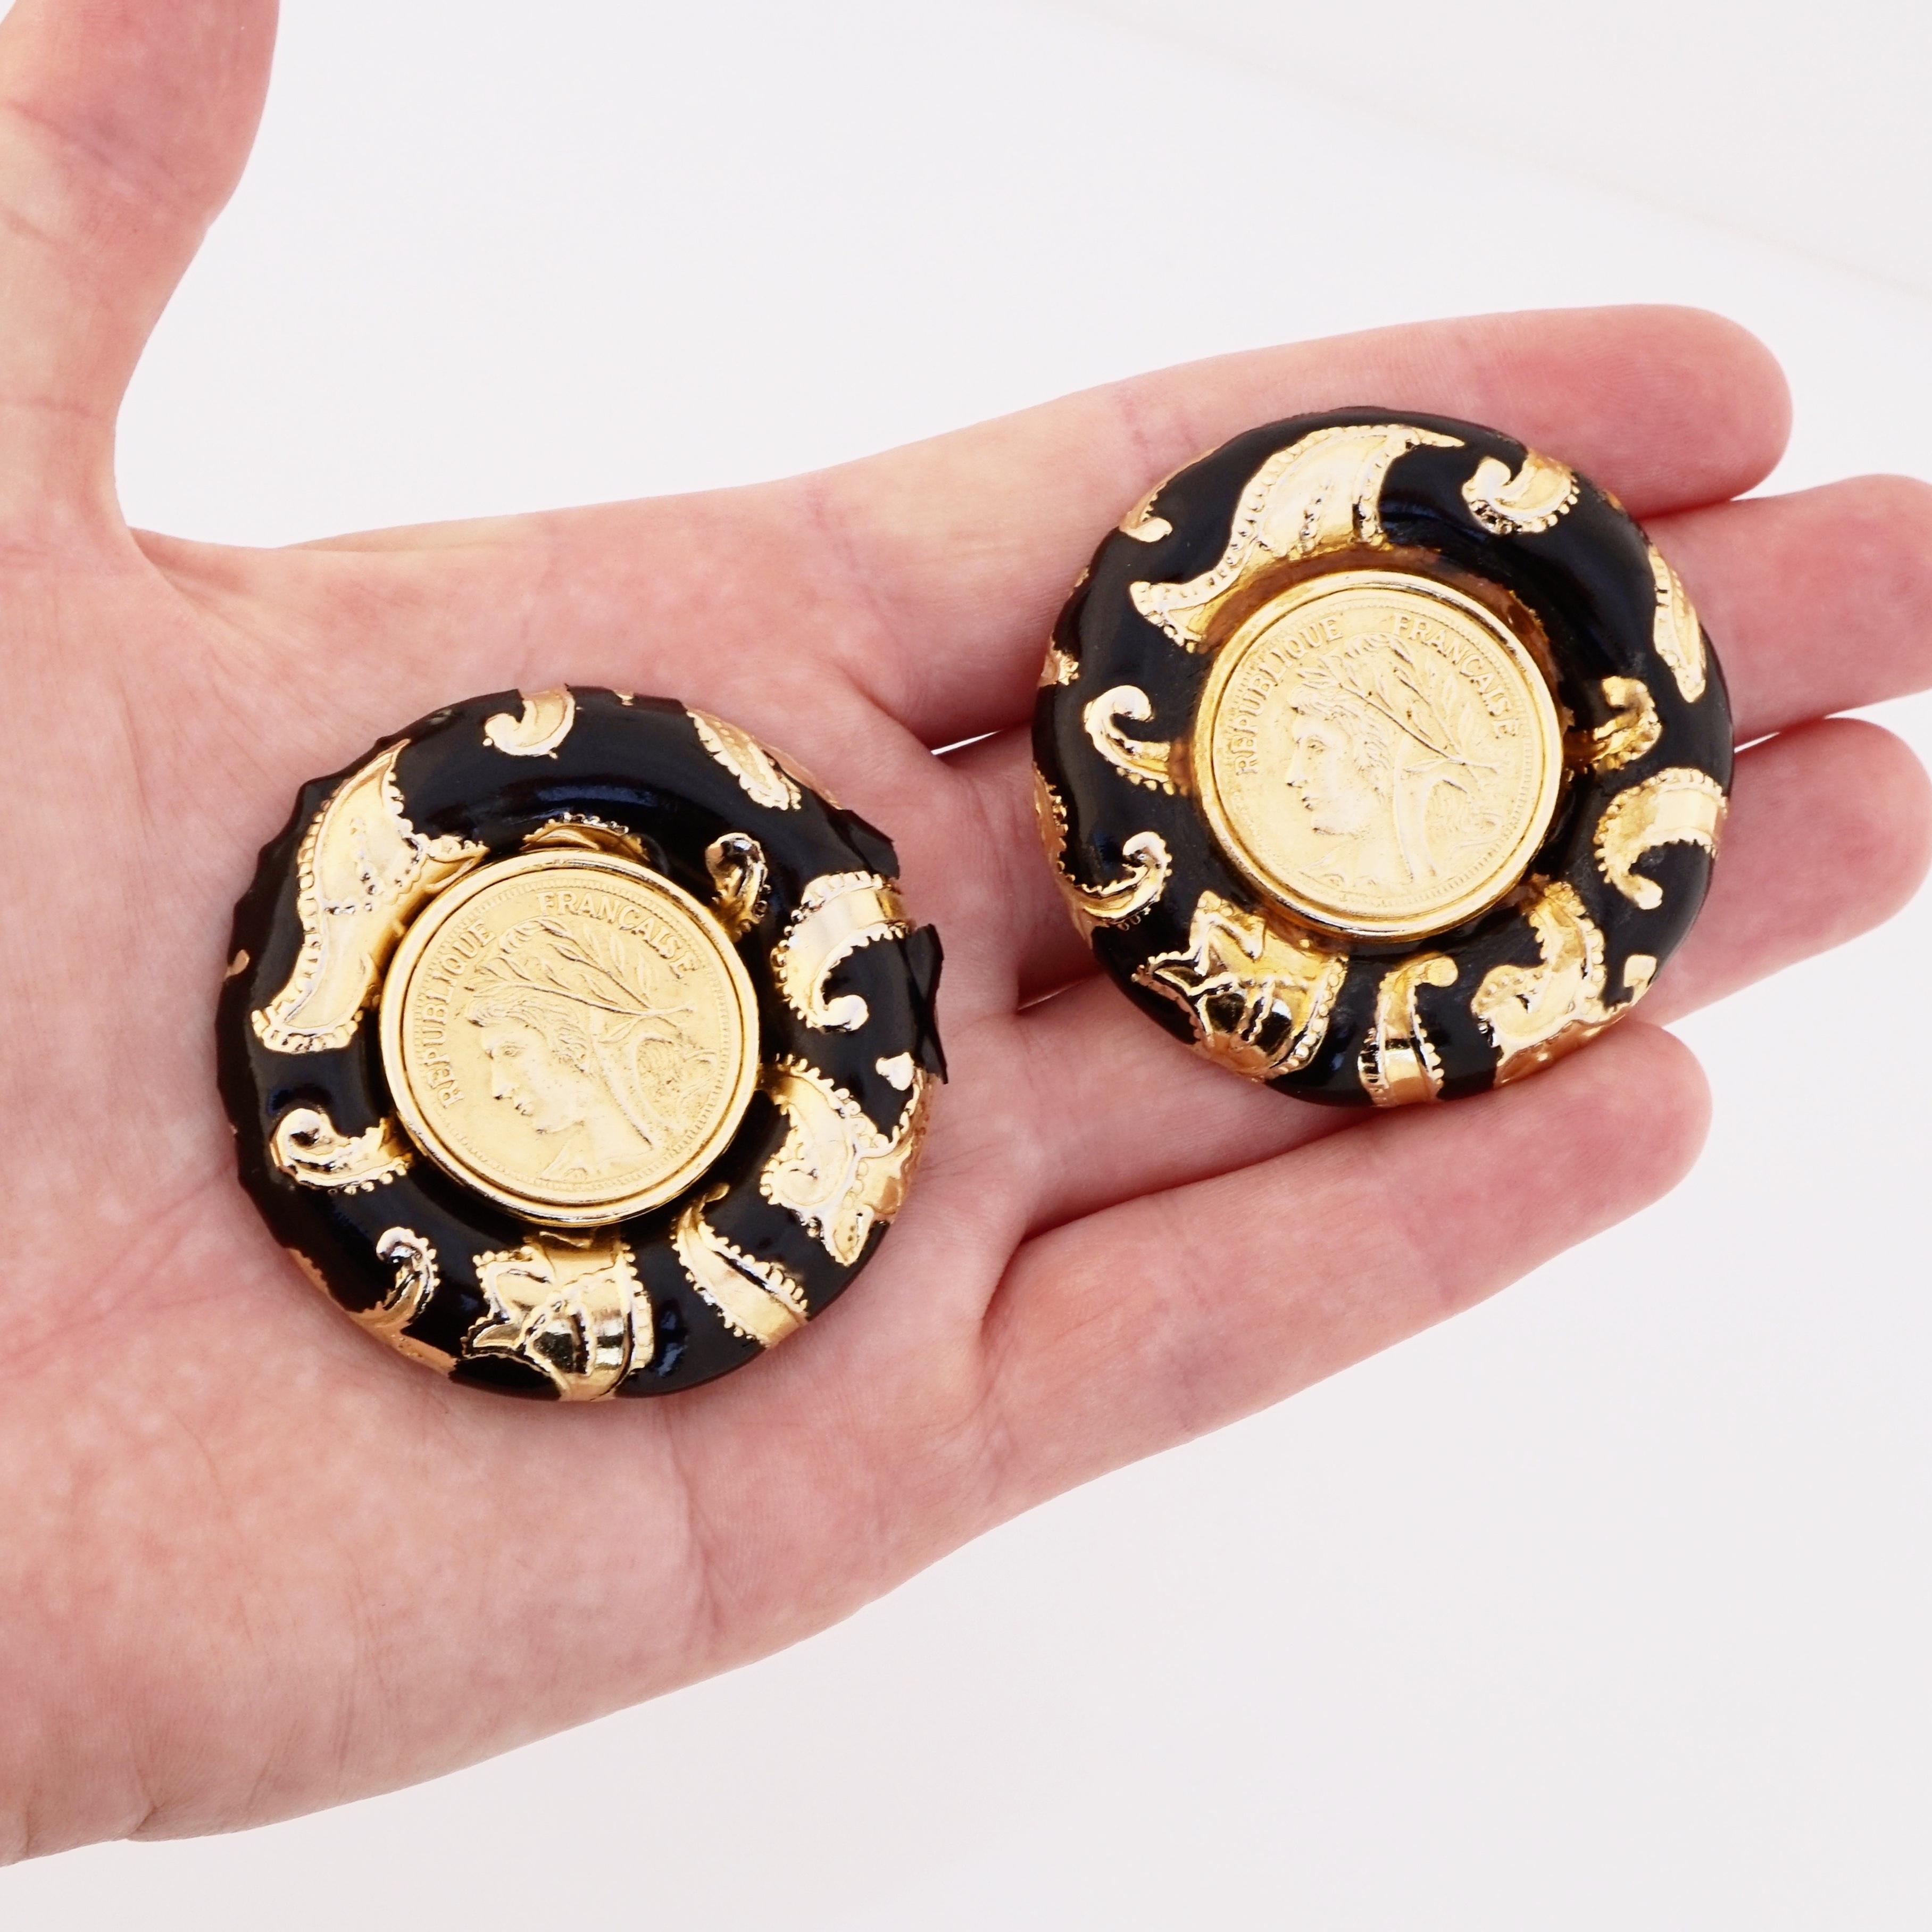 Modern Massive Black Enamel Baroque Earrings With French Coins By RJ Graziano, 1980s For Sale